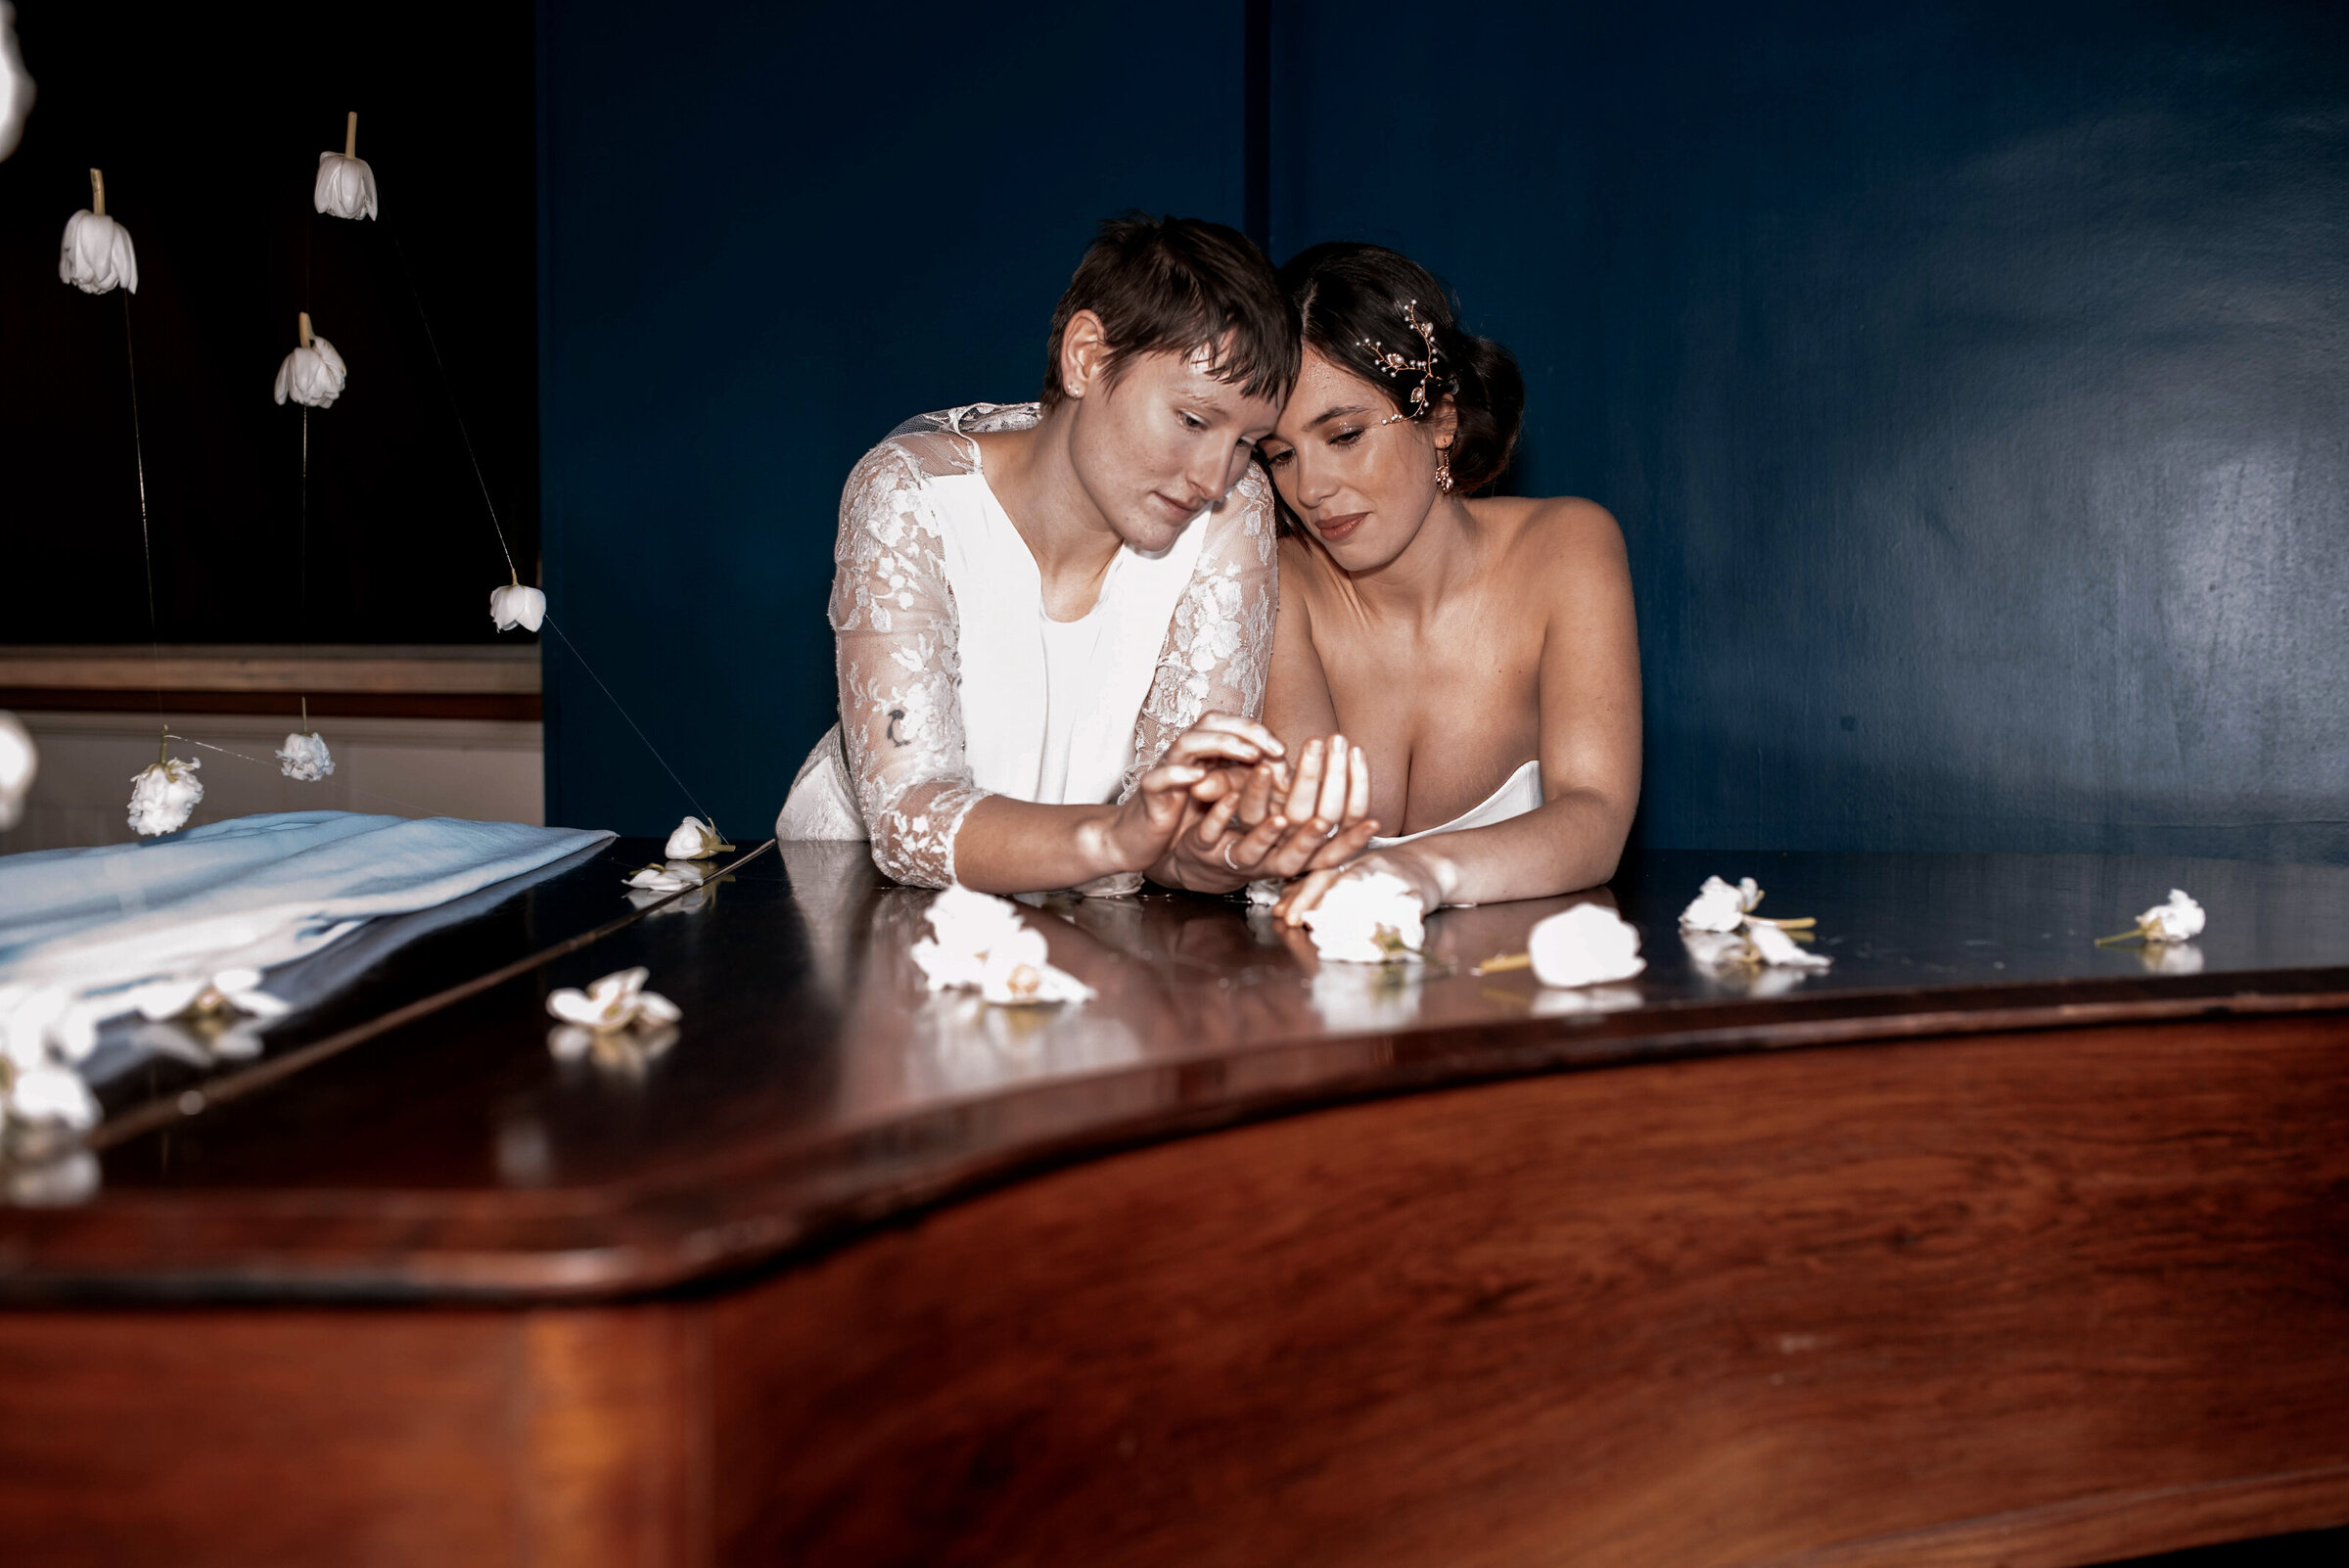 Two brides holding hands leaning on a wooden piano surrounded by hanging flowers